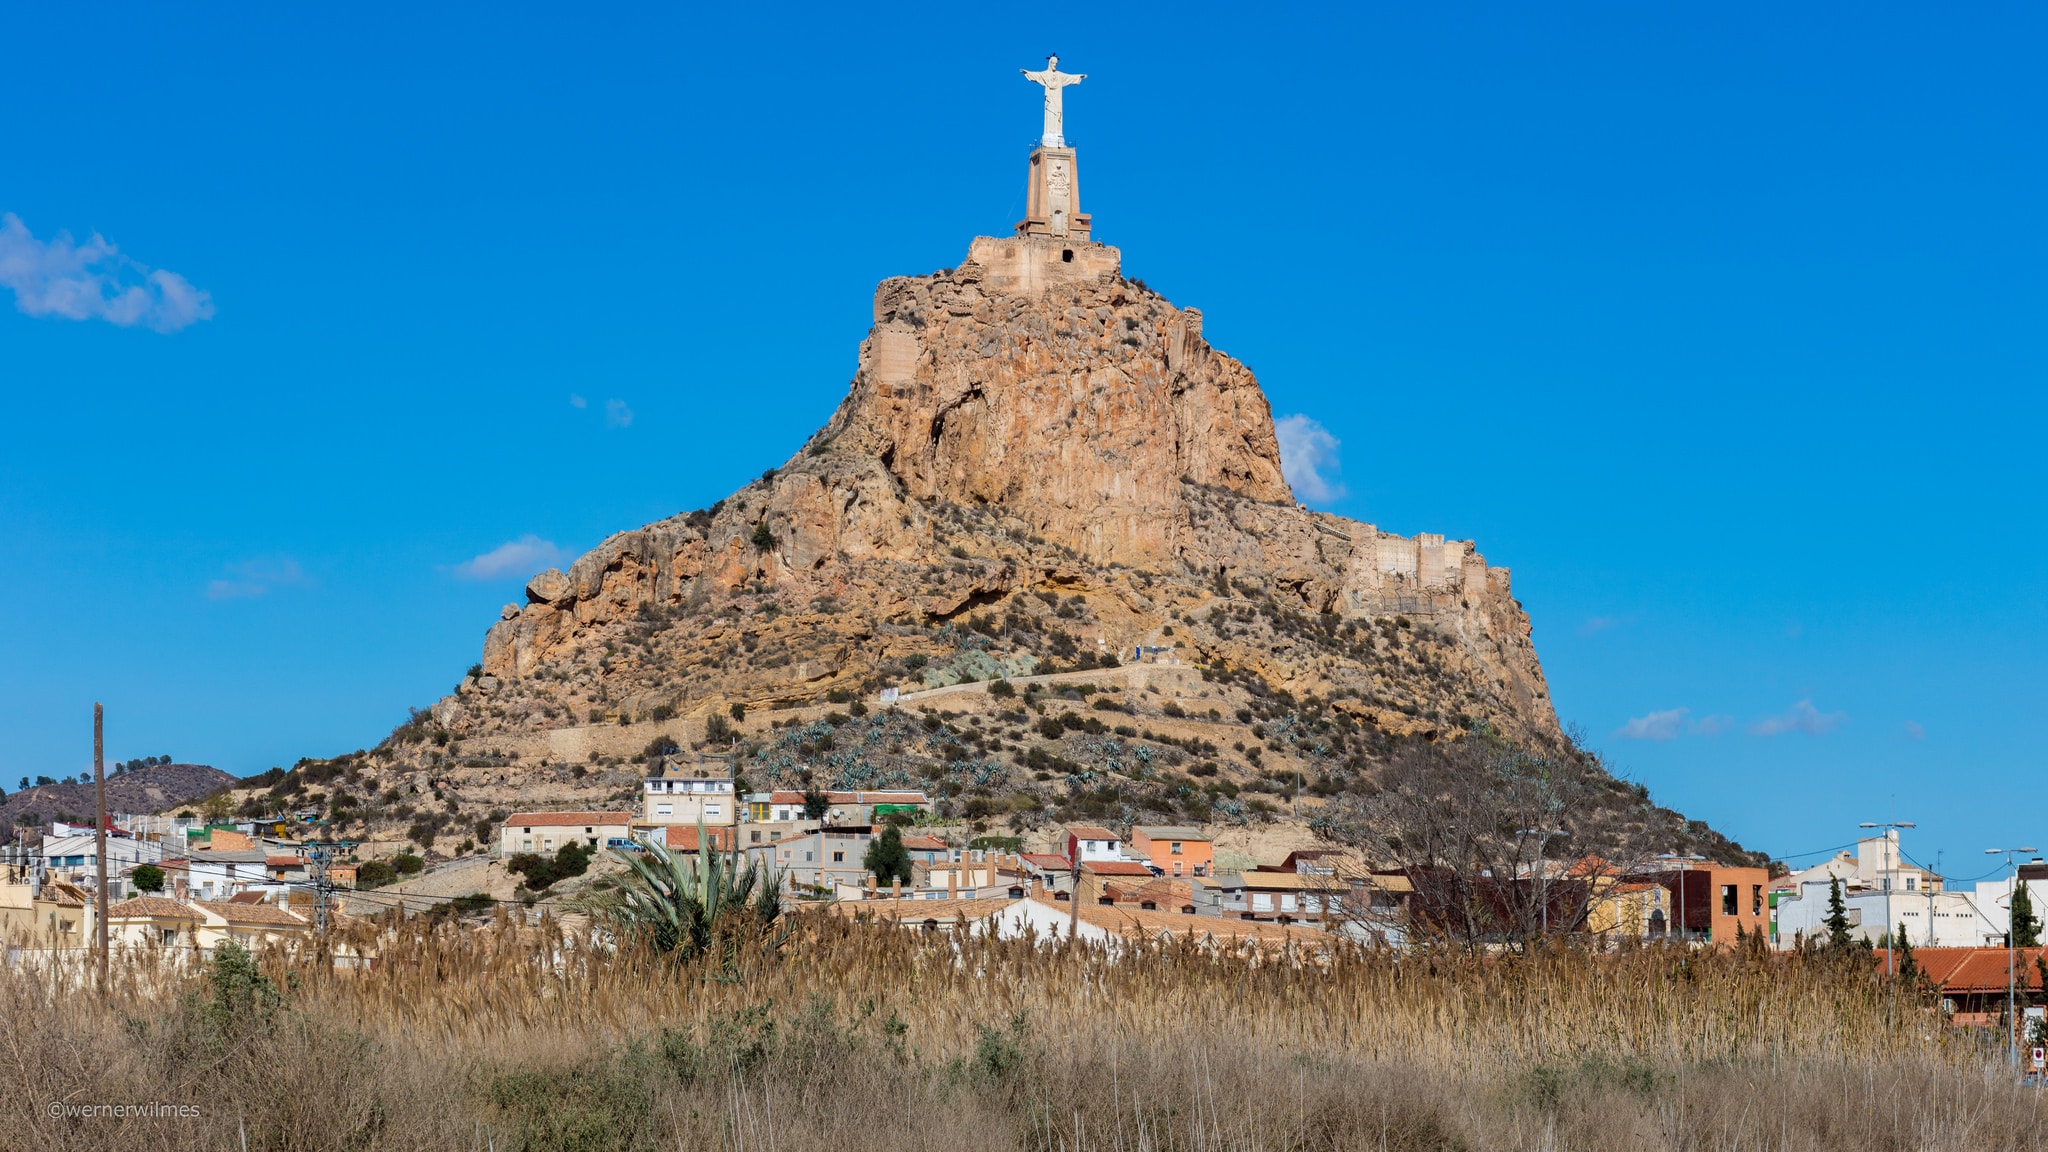 Where Is Murcia Spain - Find Out More Of Europe's Orchard